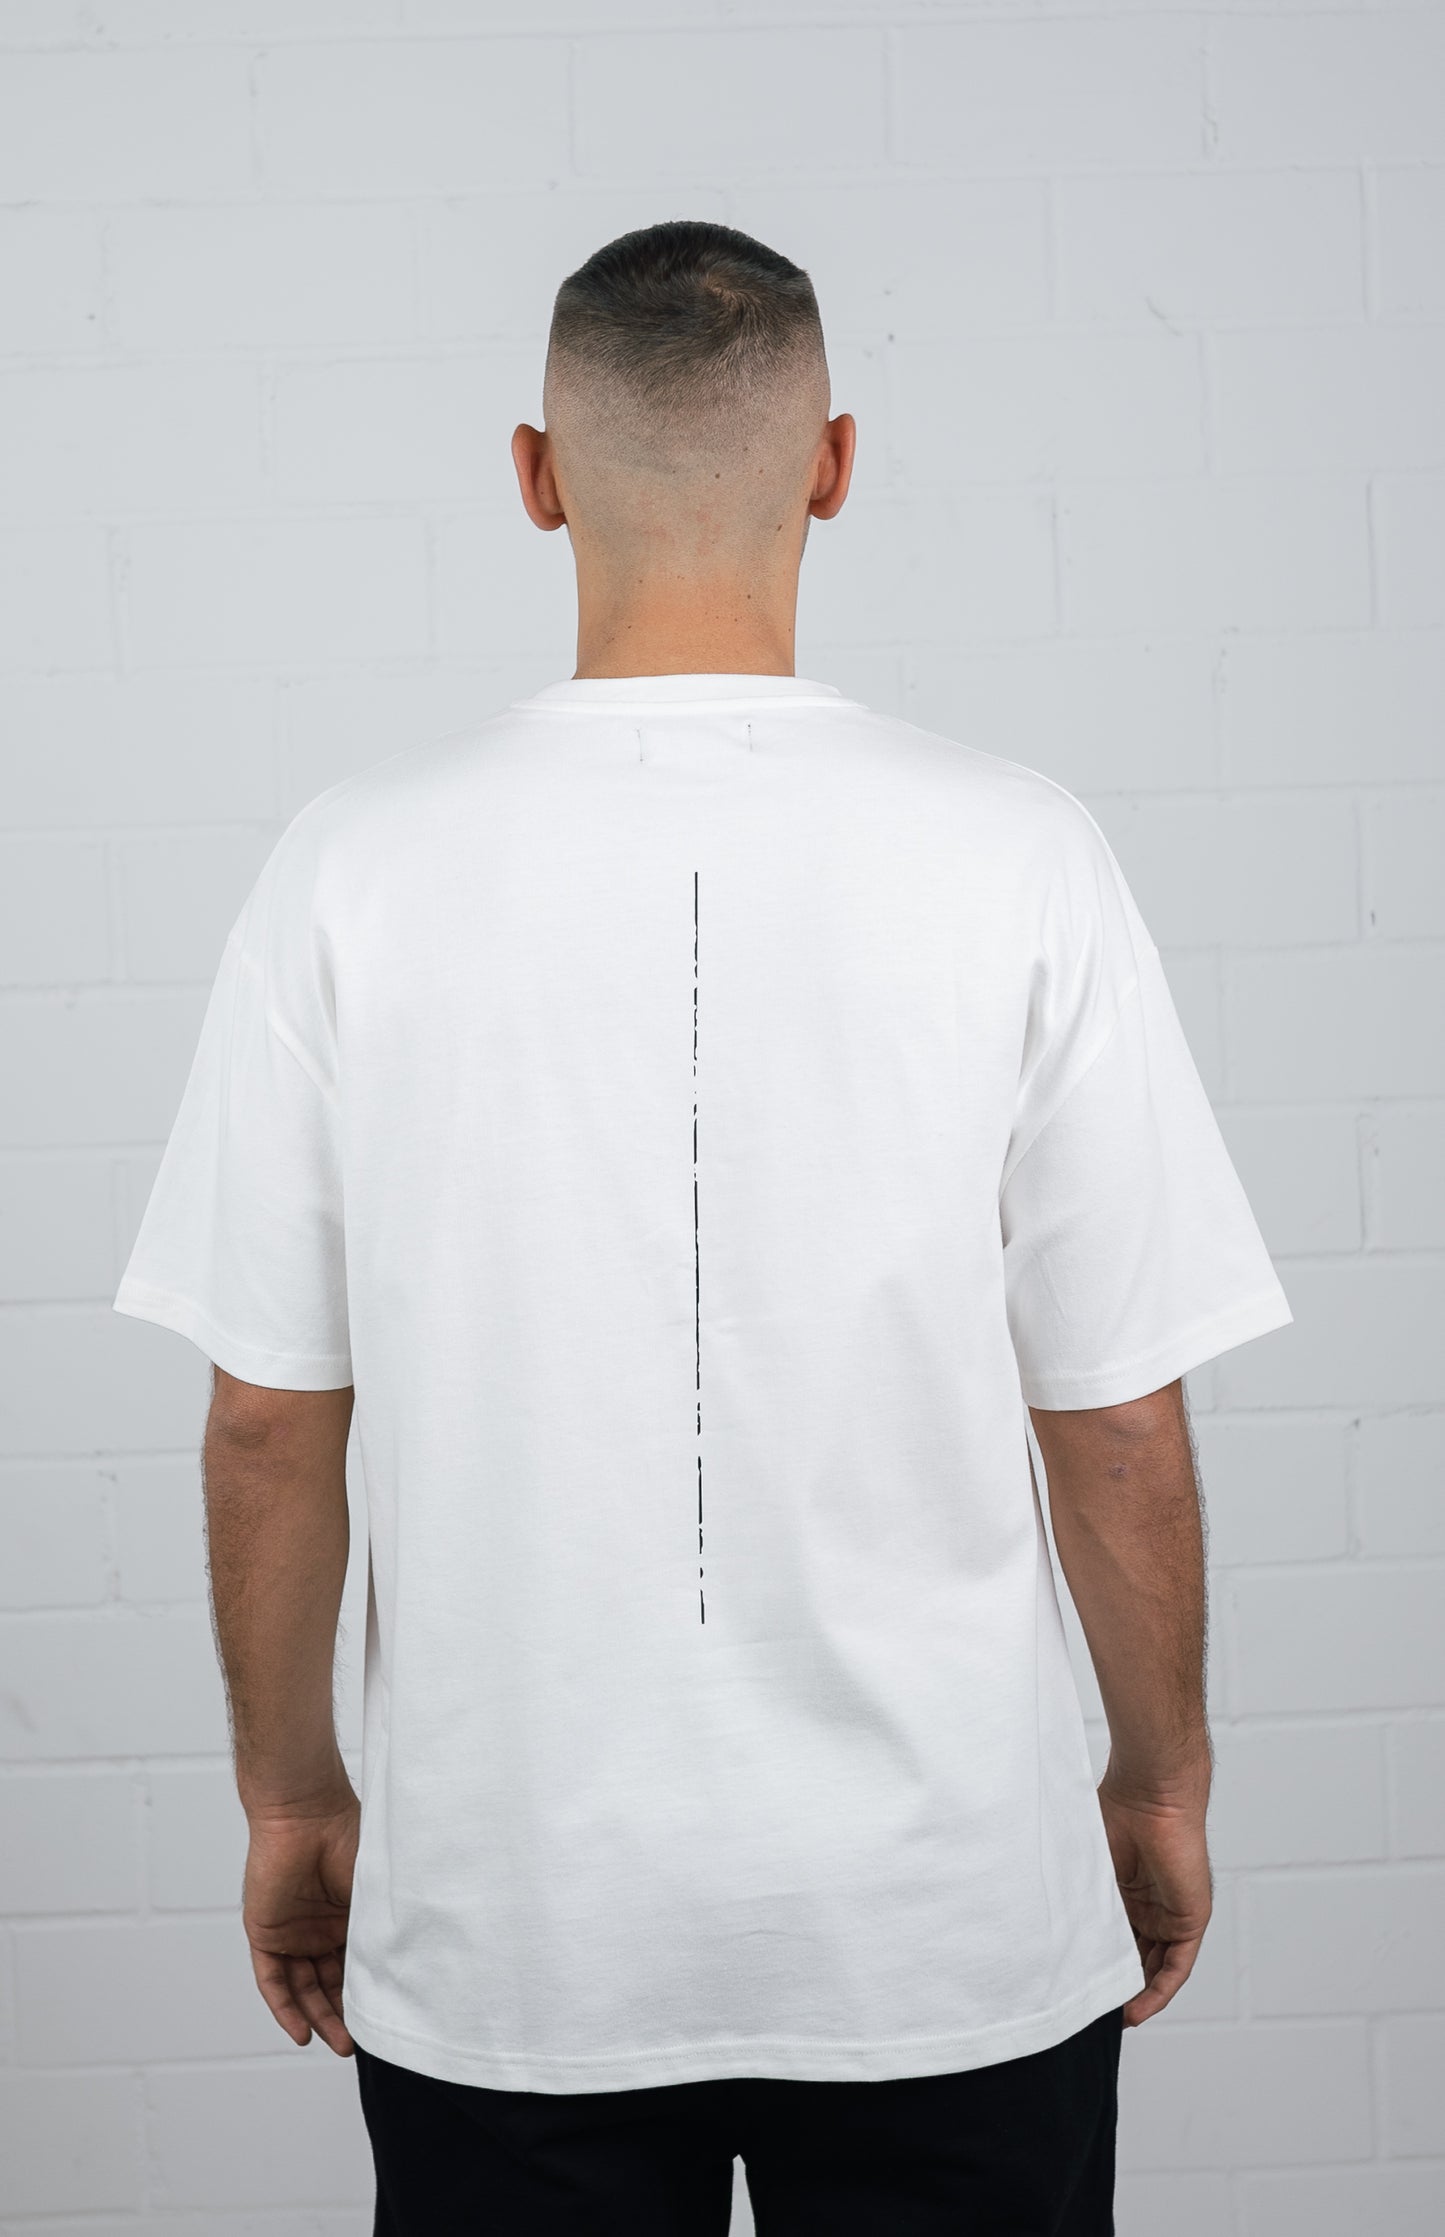 TOP OF THE WORLD T-SHIRT - WHITE